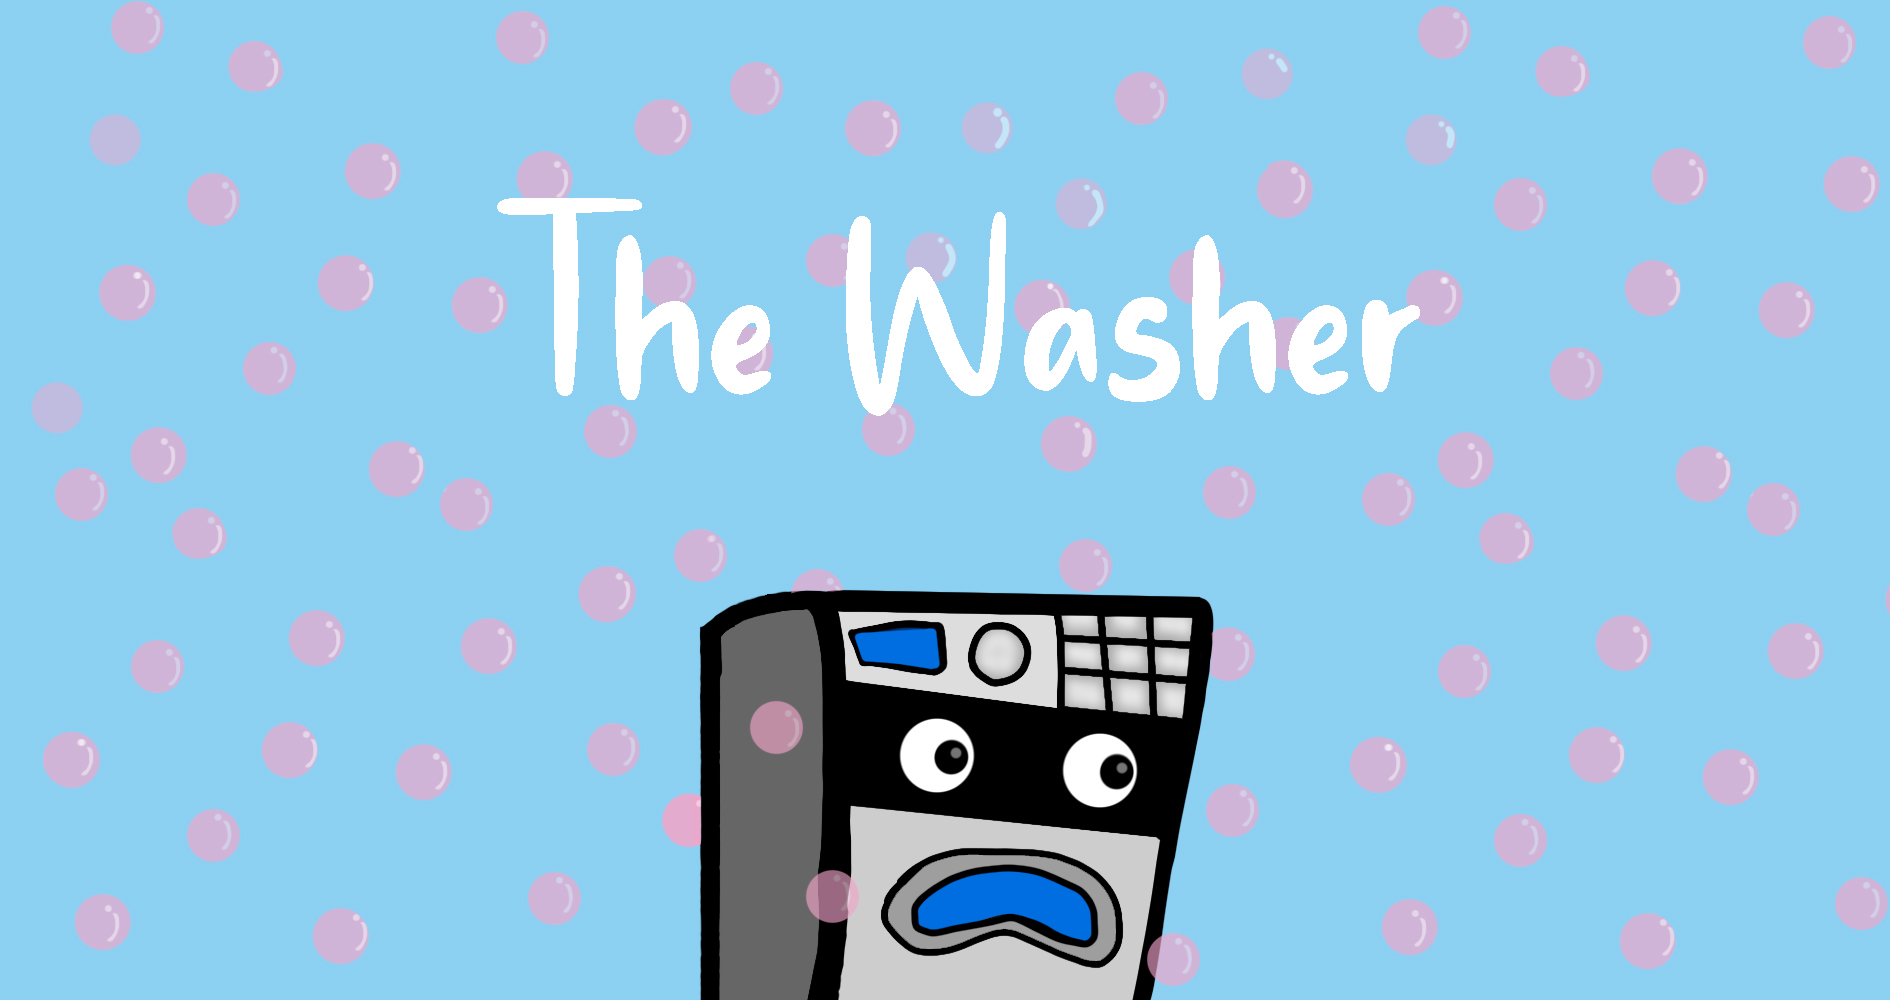 The washer